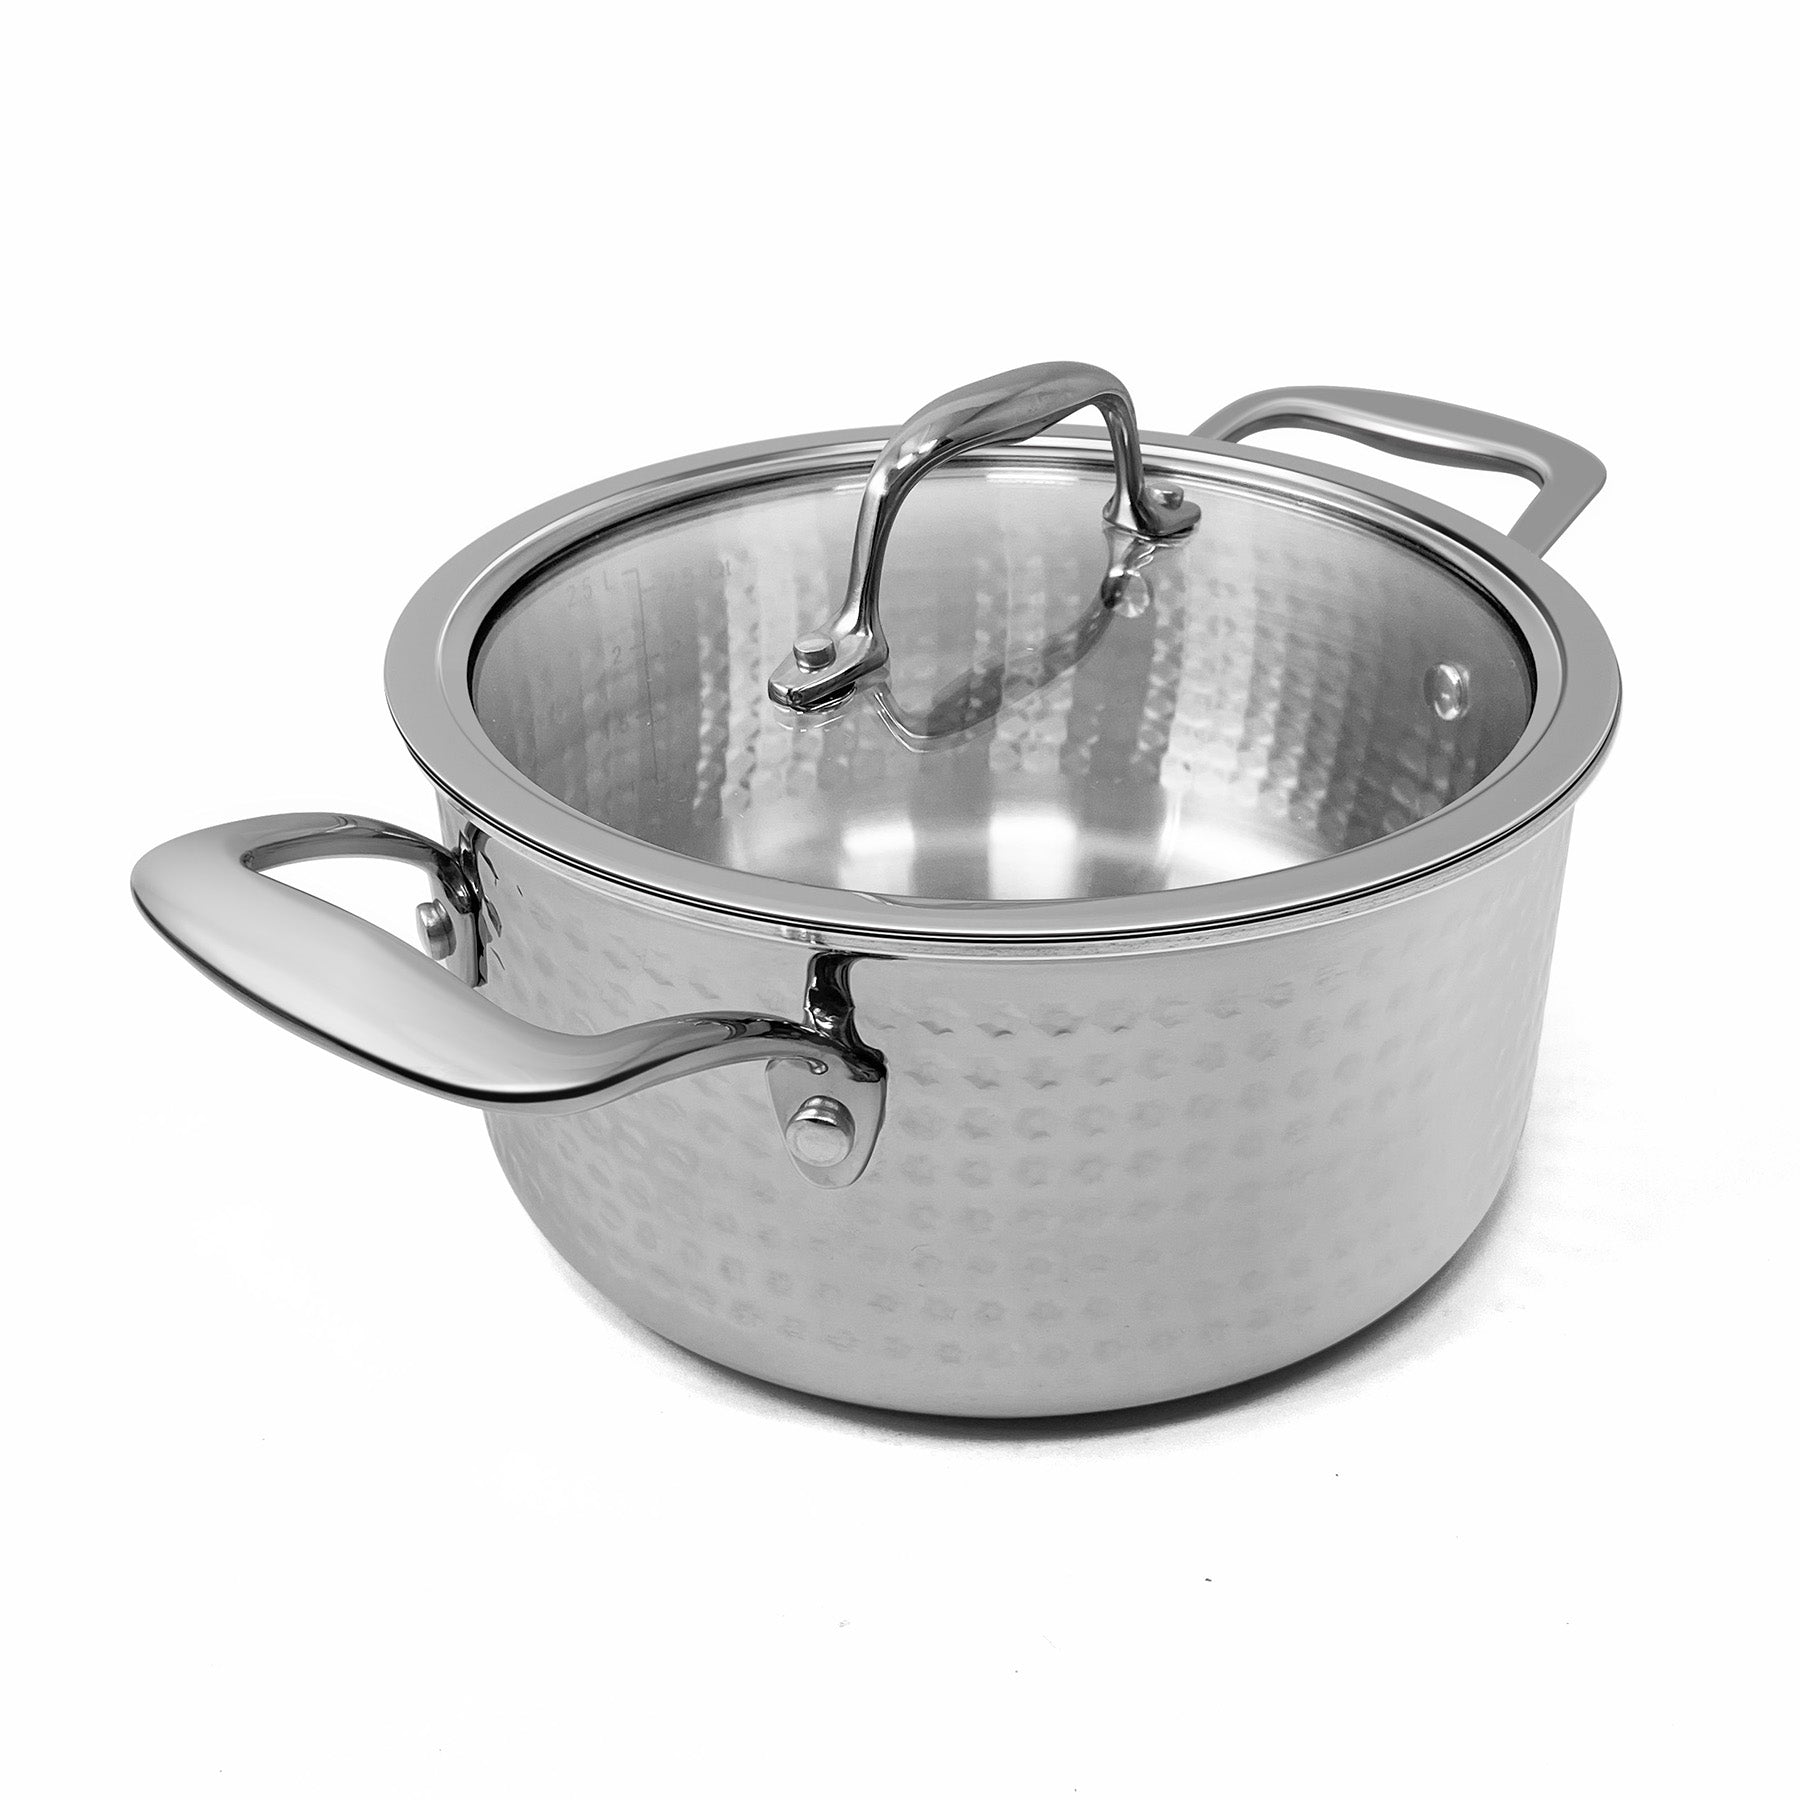 Fortune Candy 4-Quart Saucepan with Lid, Tri-Ply, 18/8 Stainless